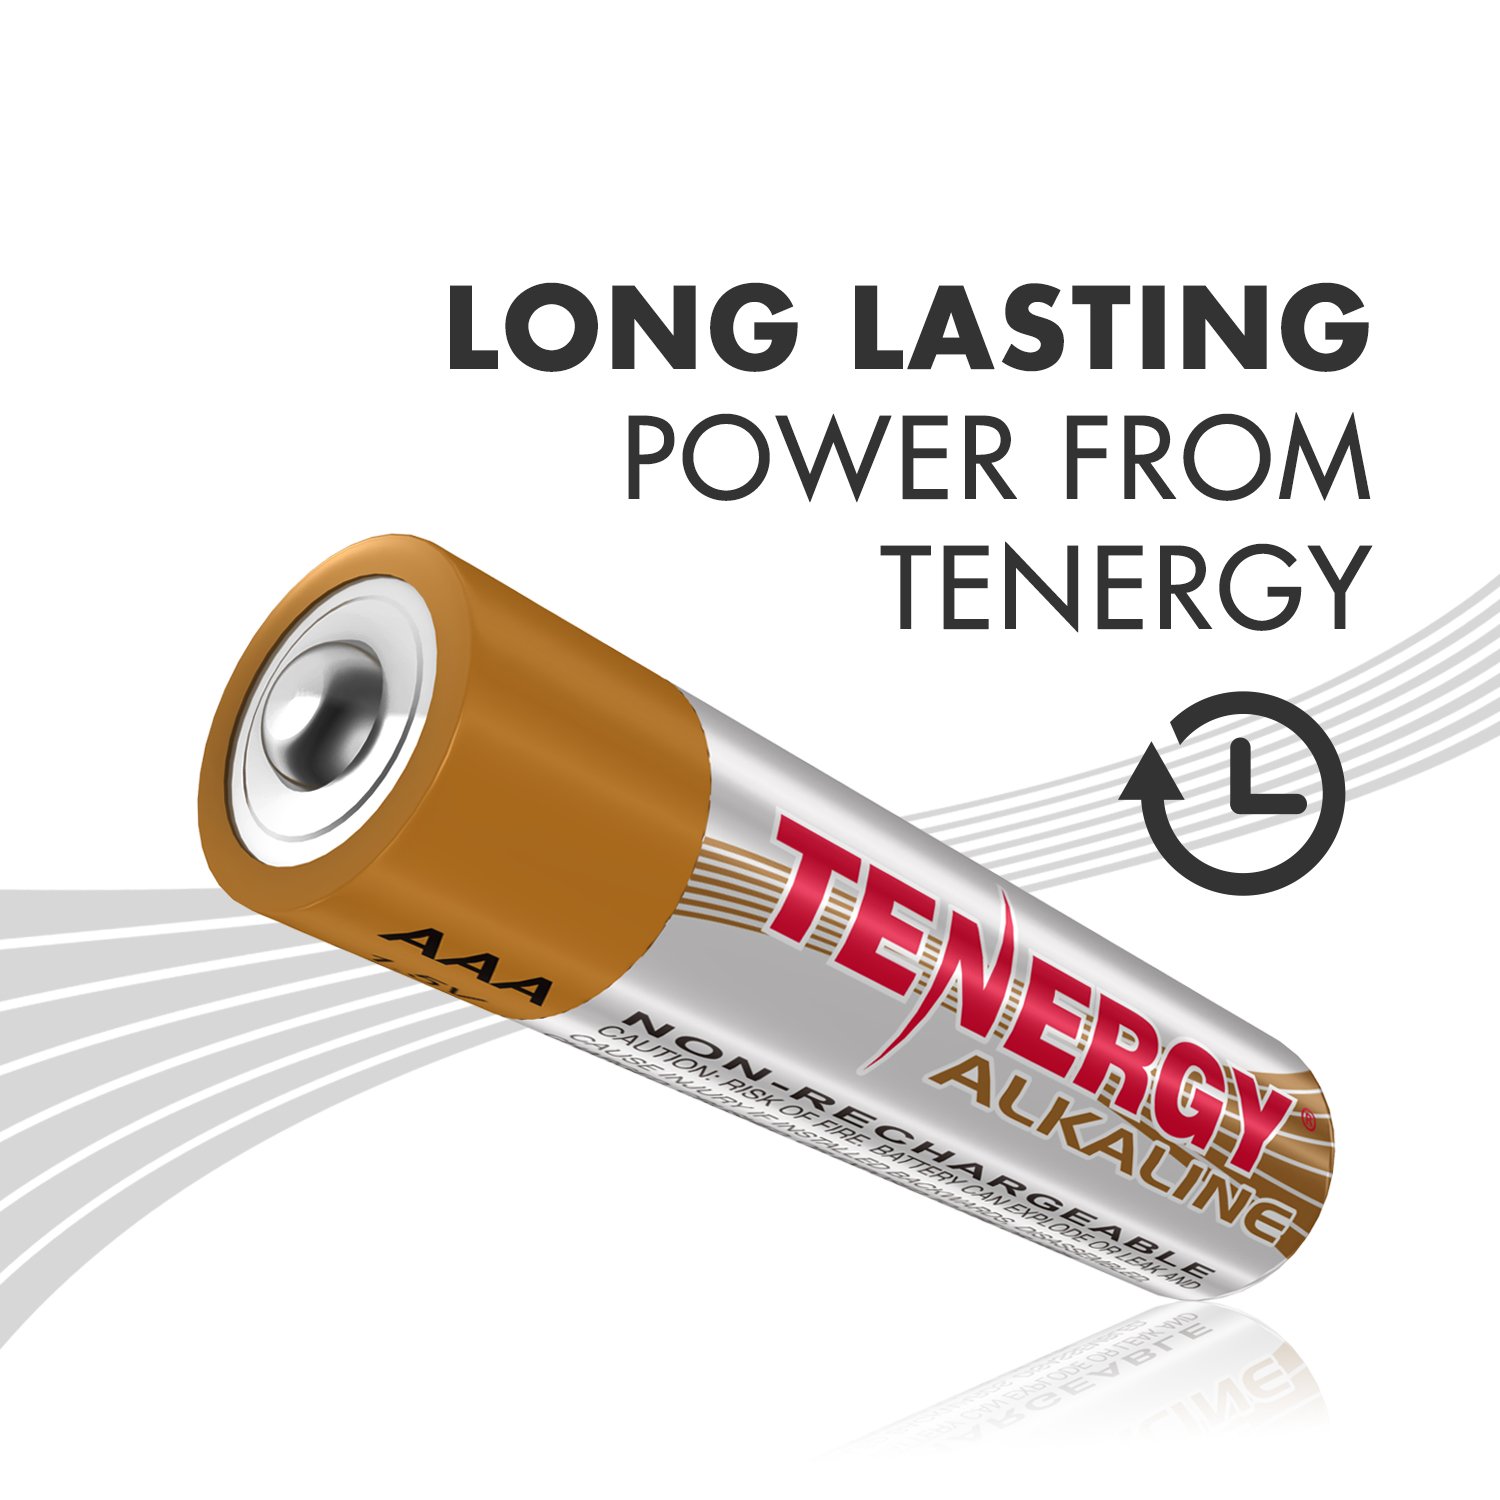 Tenergy 1.5V AAA Alkaline Battery, High Performance AAA Non-Rechargeable Batteries for Clocks, Remotes, Toys & Electronic Devices, Replacement AAA Cell Batteries, 720 Pack